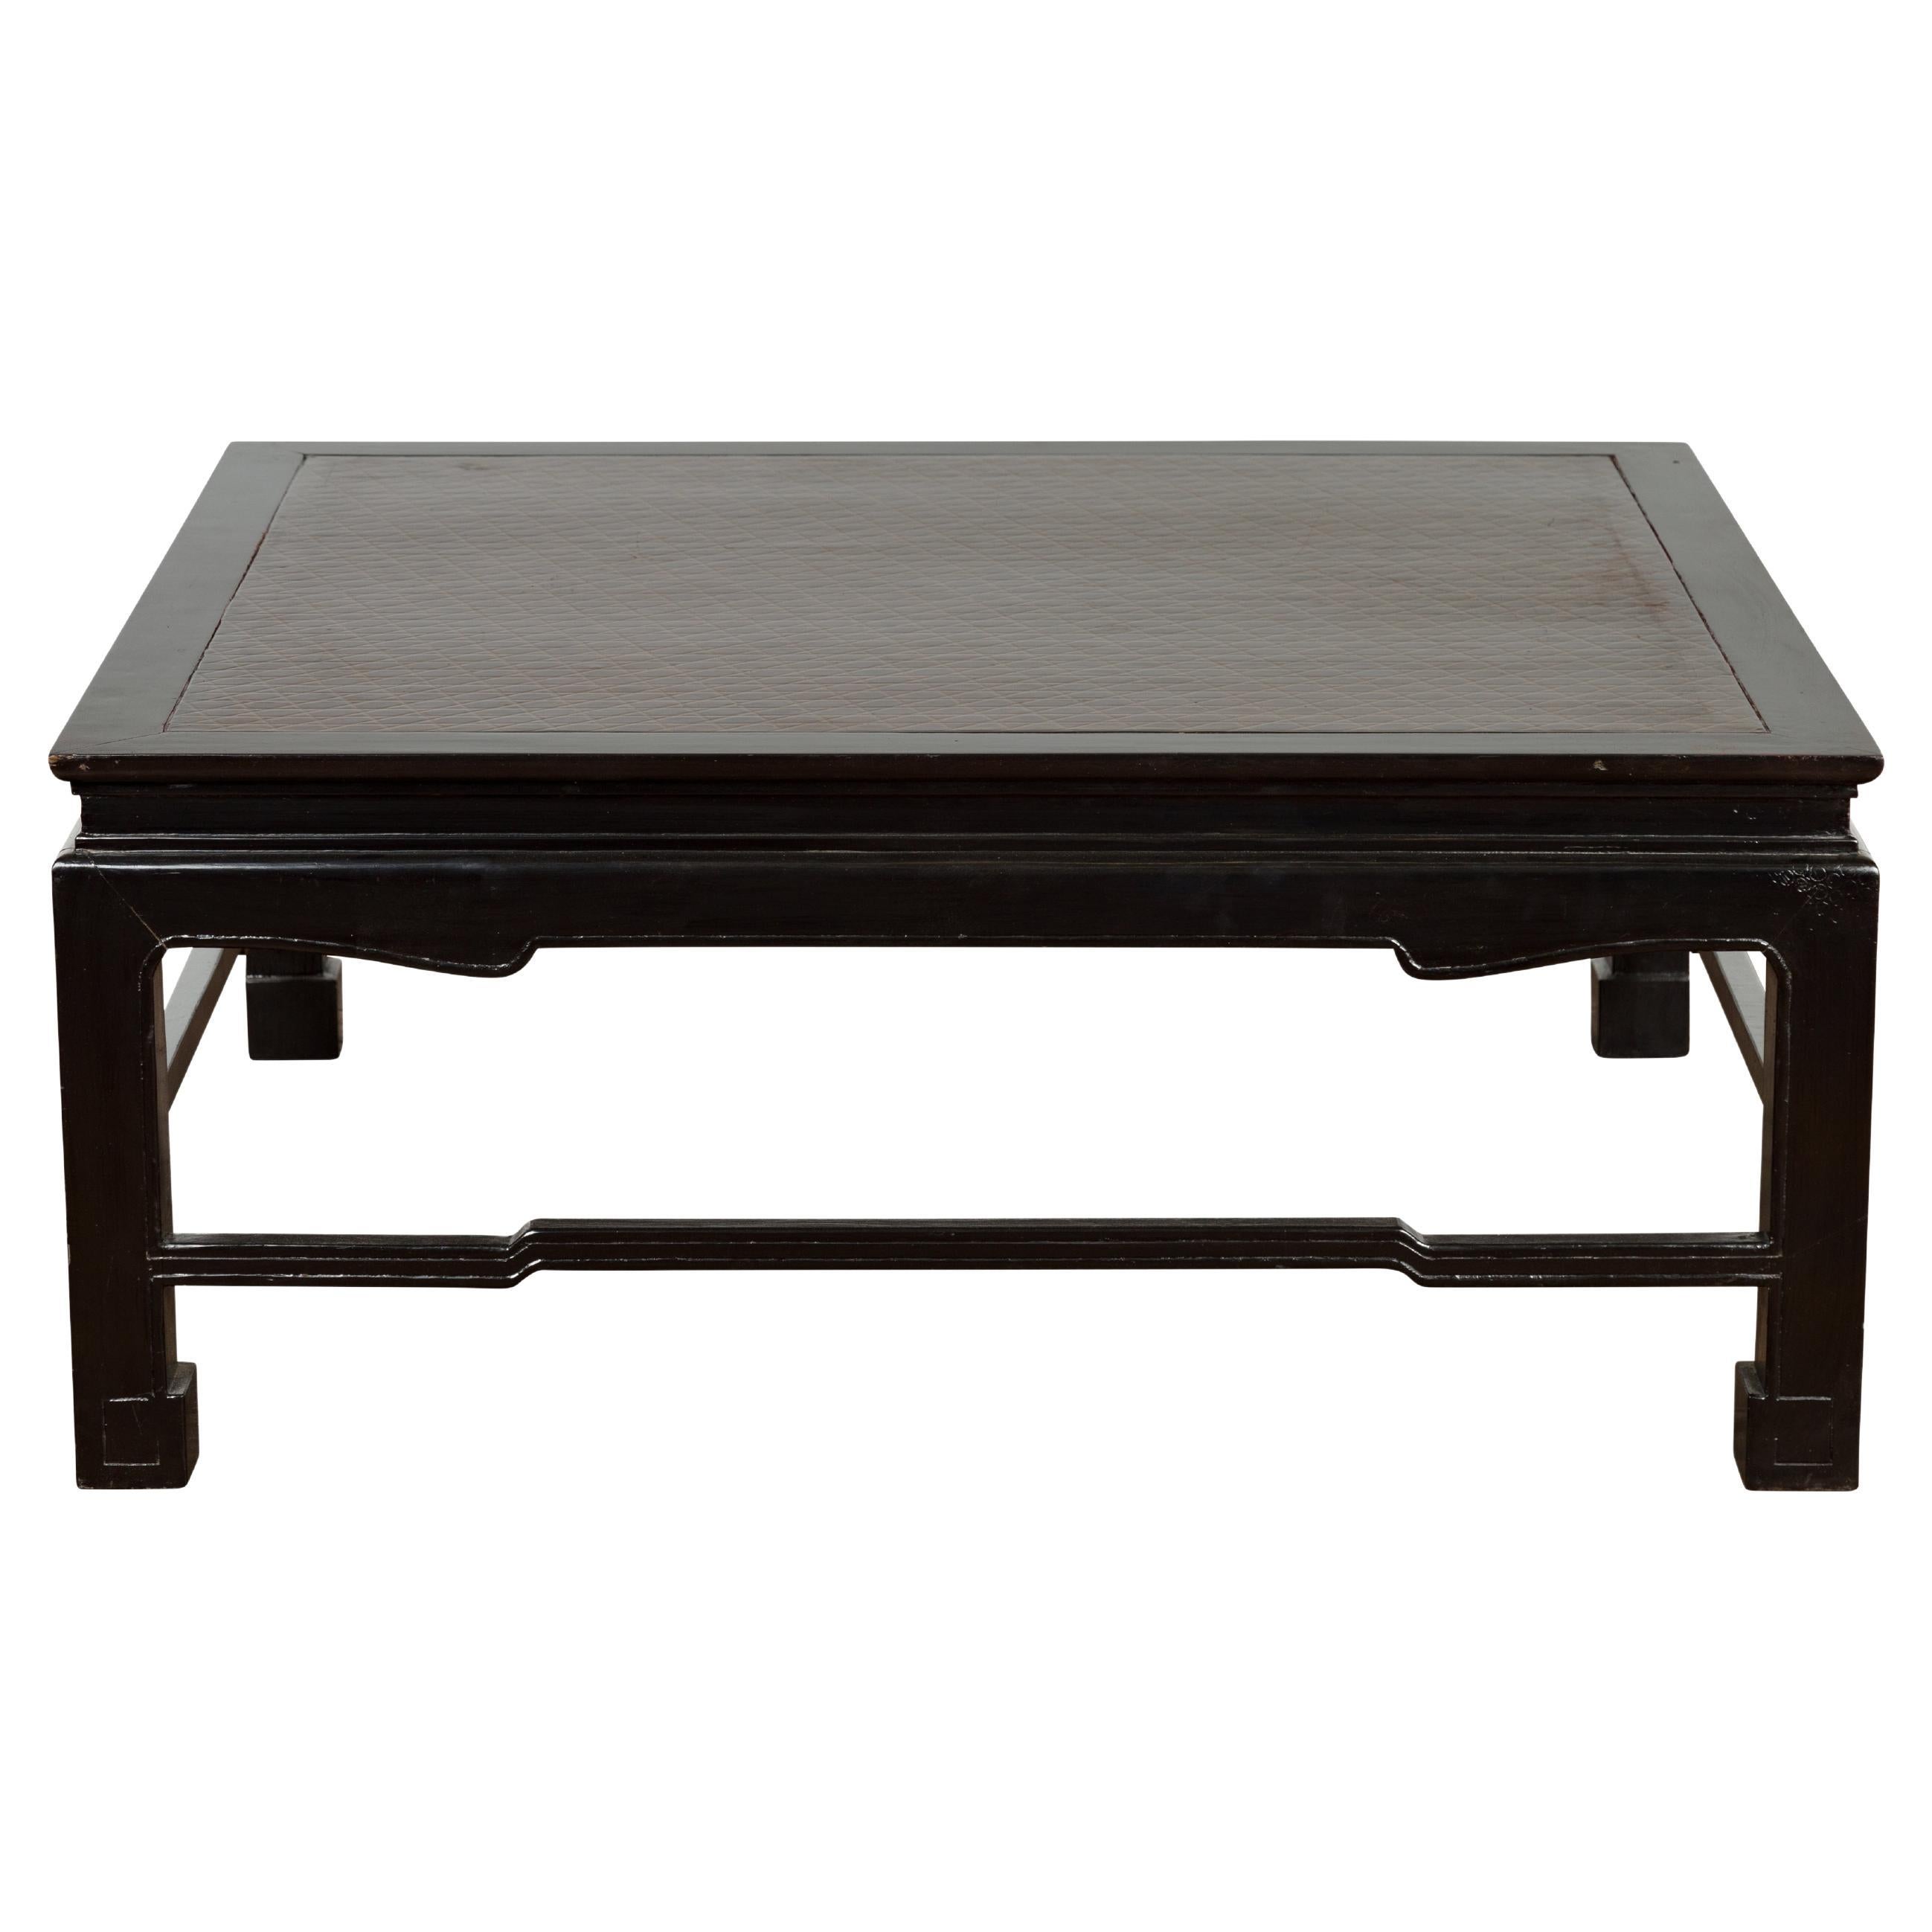 Negora Lacquered Square Vintage Coffee Table For Sale